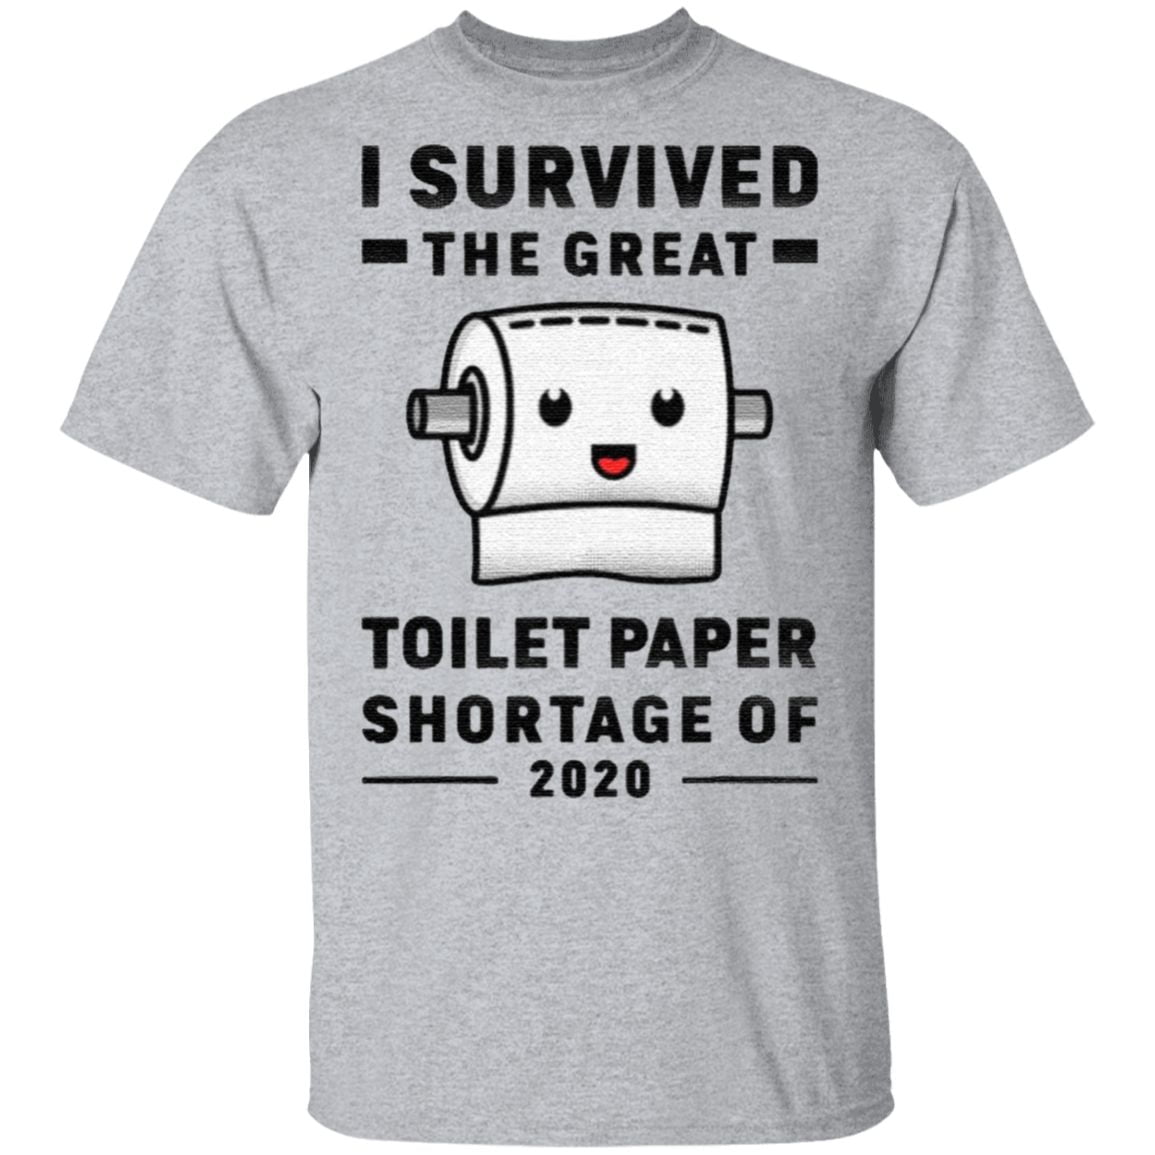 I Survived The Great Toilet Paper Shortage Of 2020 TShirt